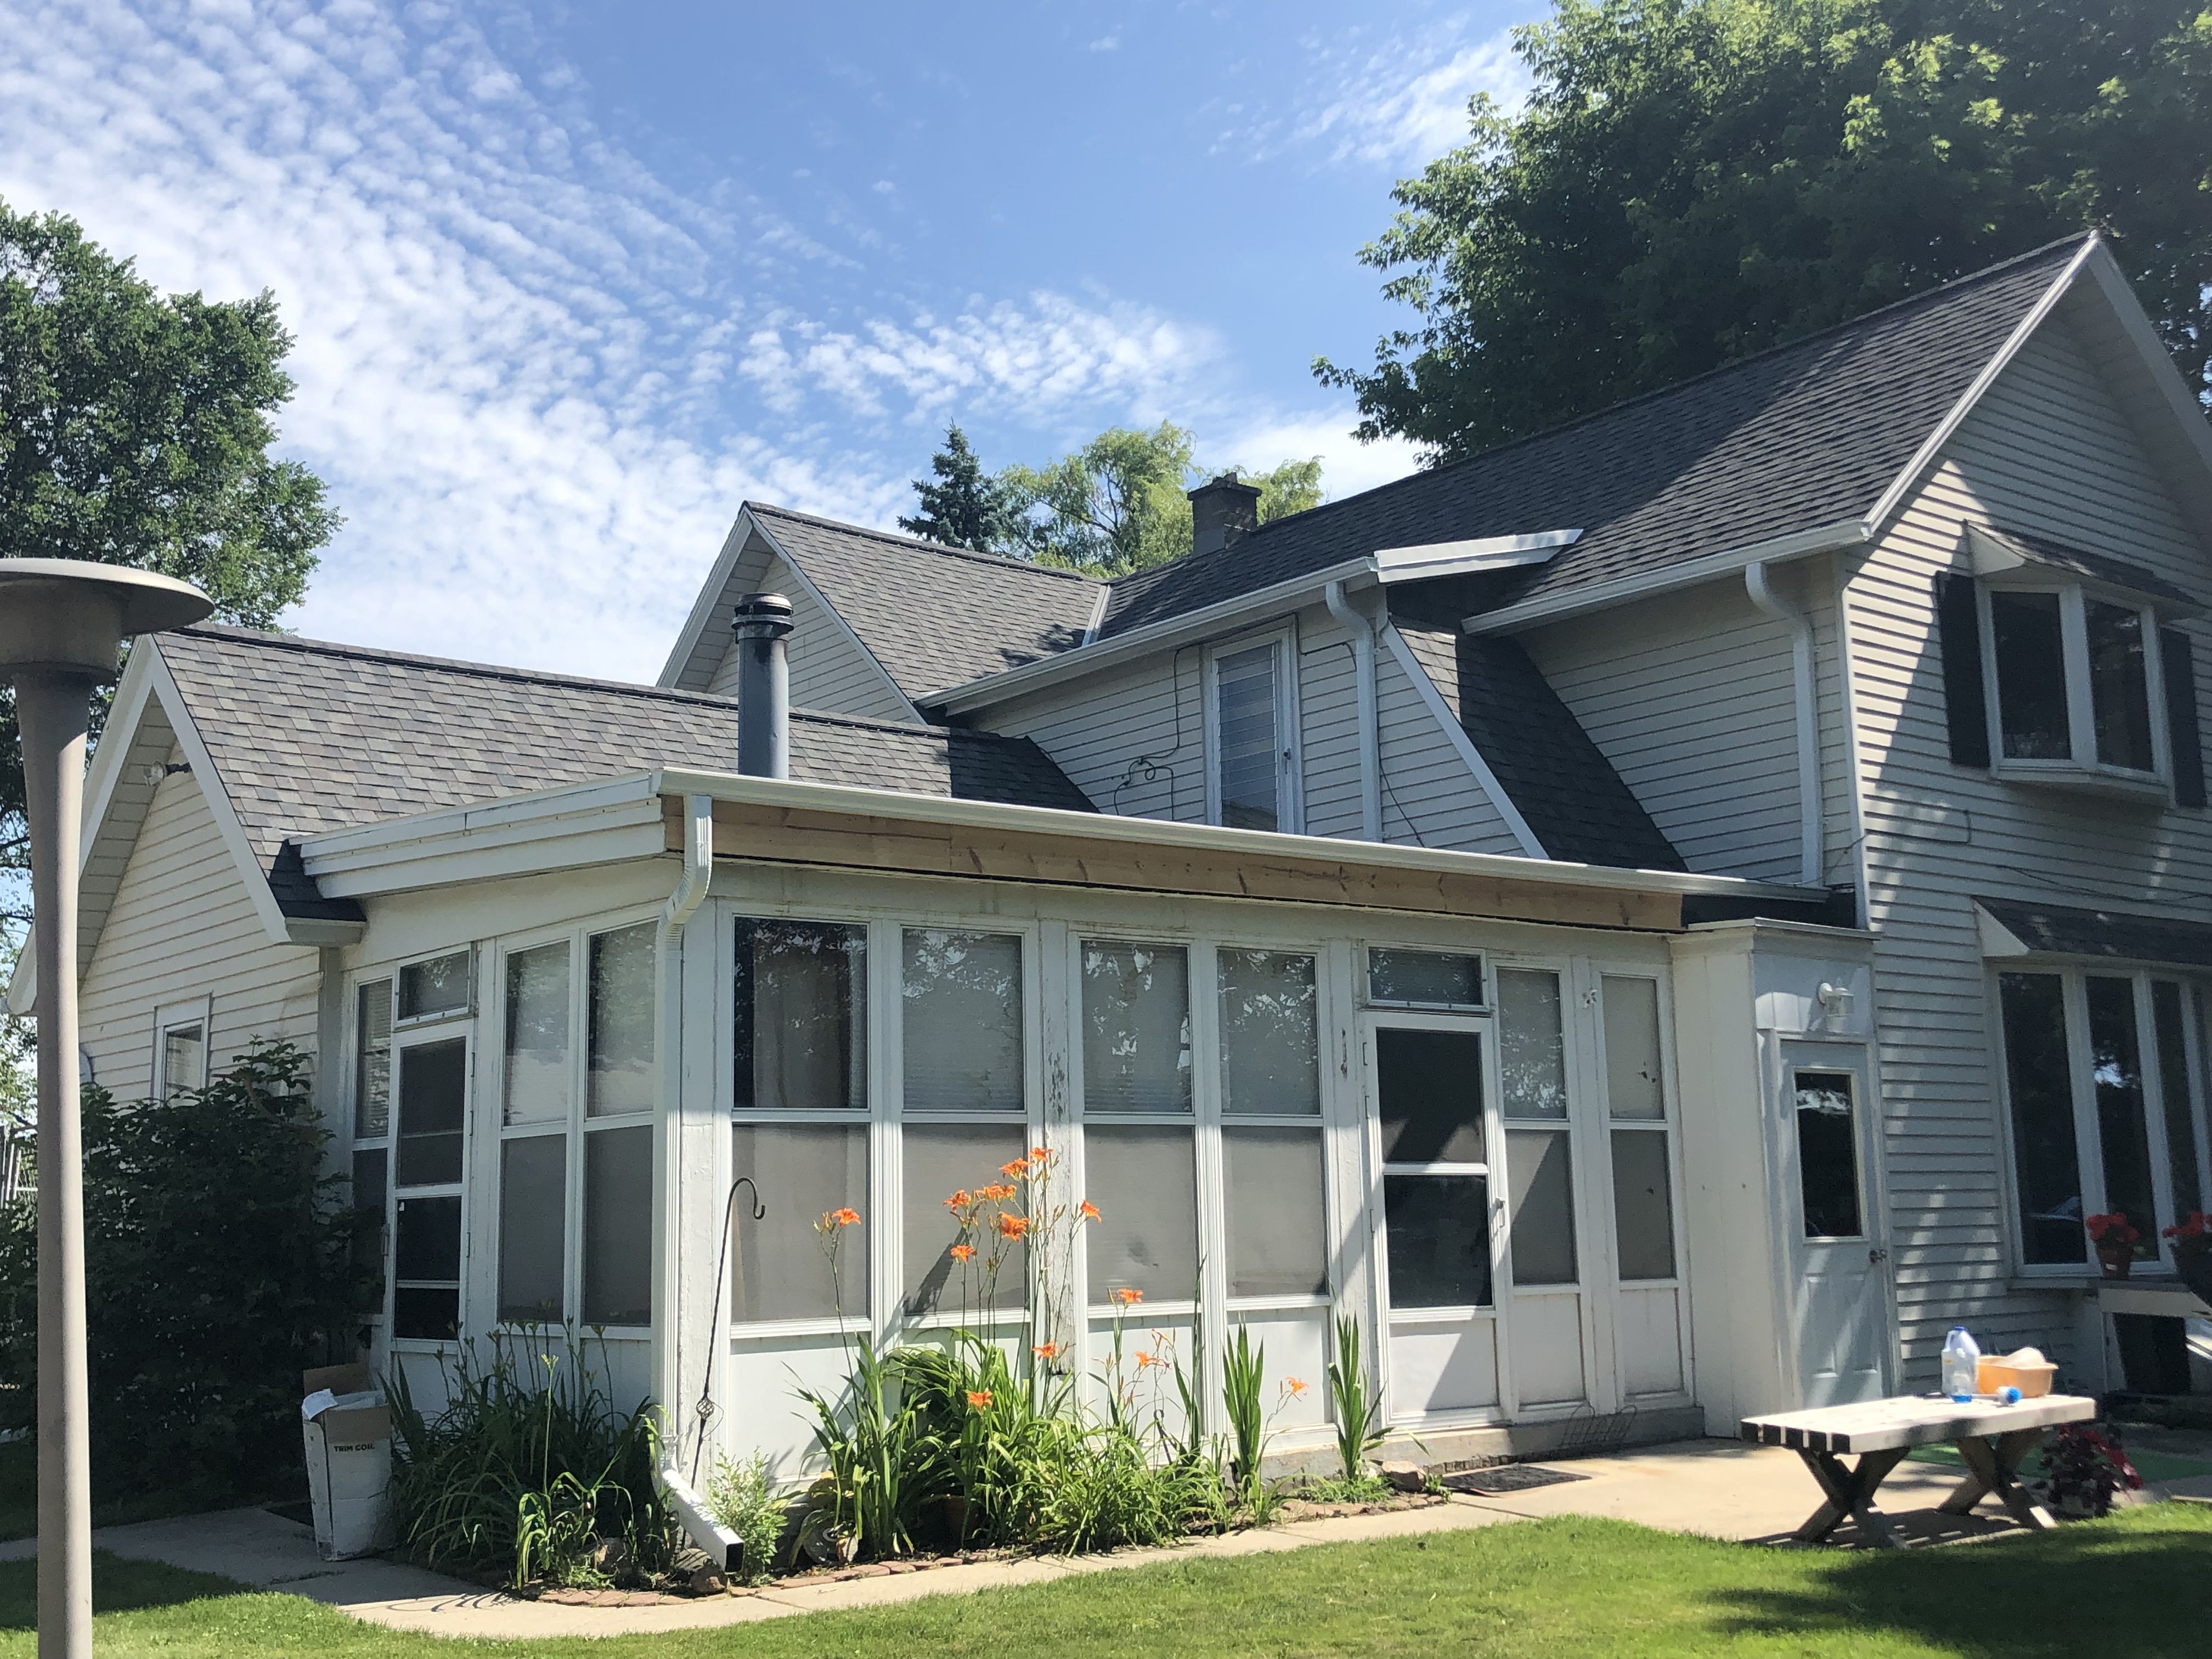 Wisconsin Roofing LLC | Germantown | Residential | New Roof | Added intake and exhaust ventilation difficult farm house | custom transitions | Prior rubber roof done poorly that leaked | Re-framed perimeter